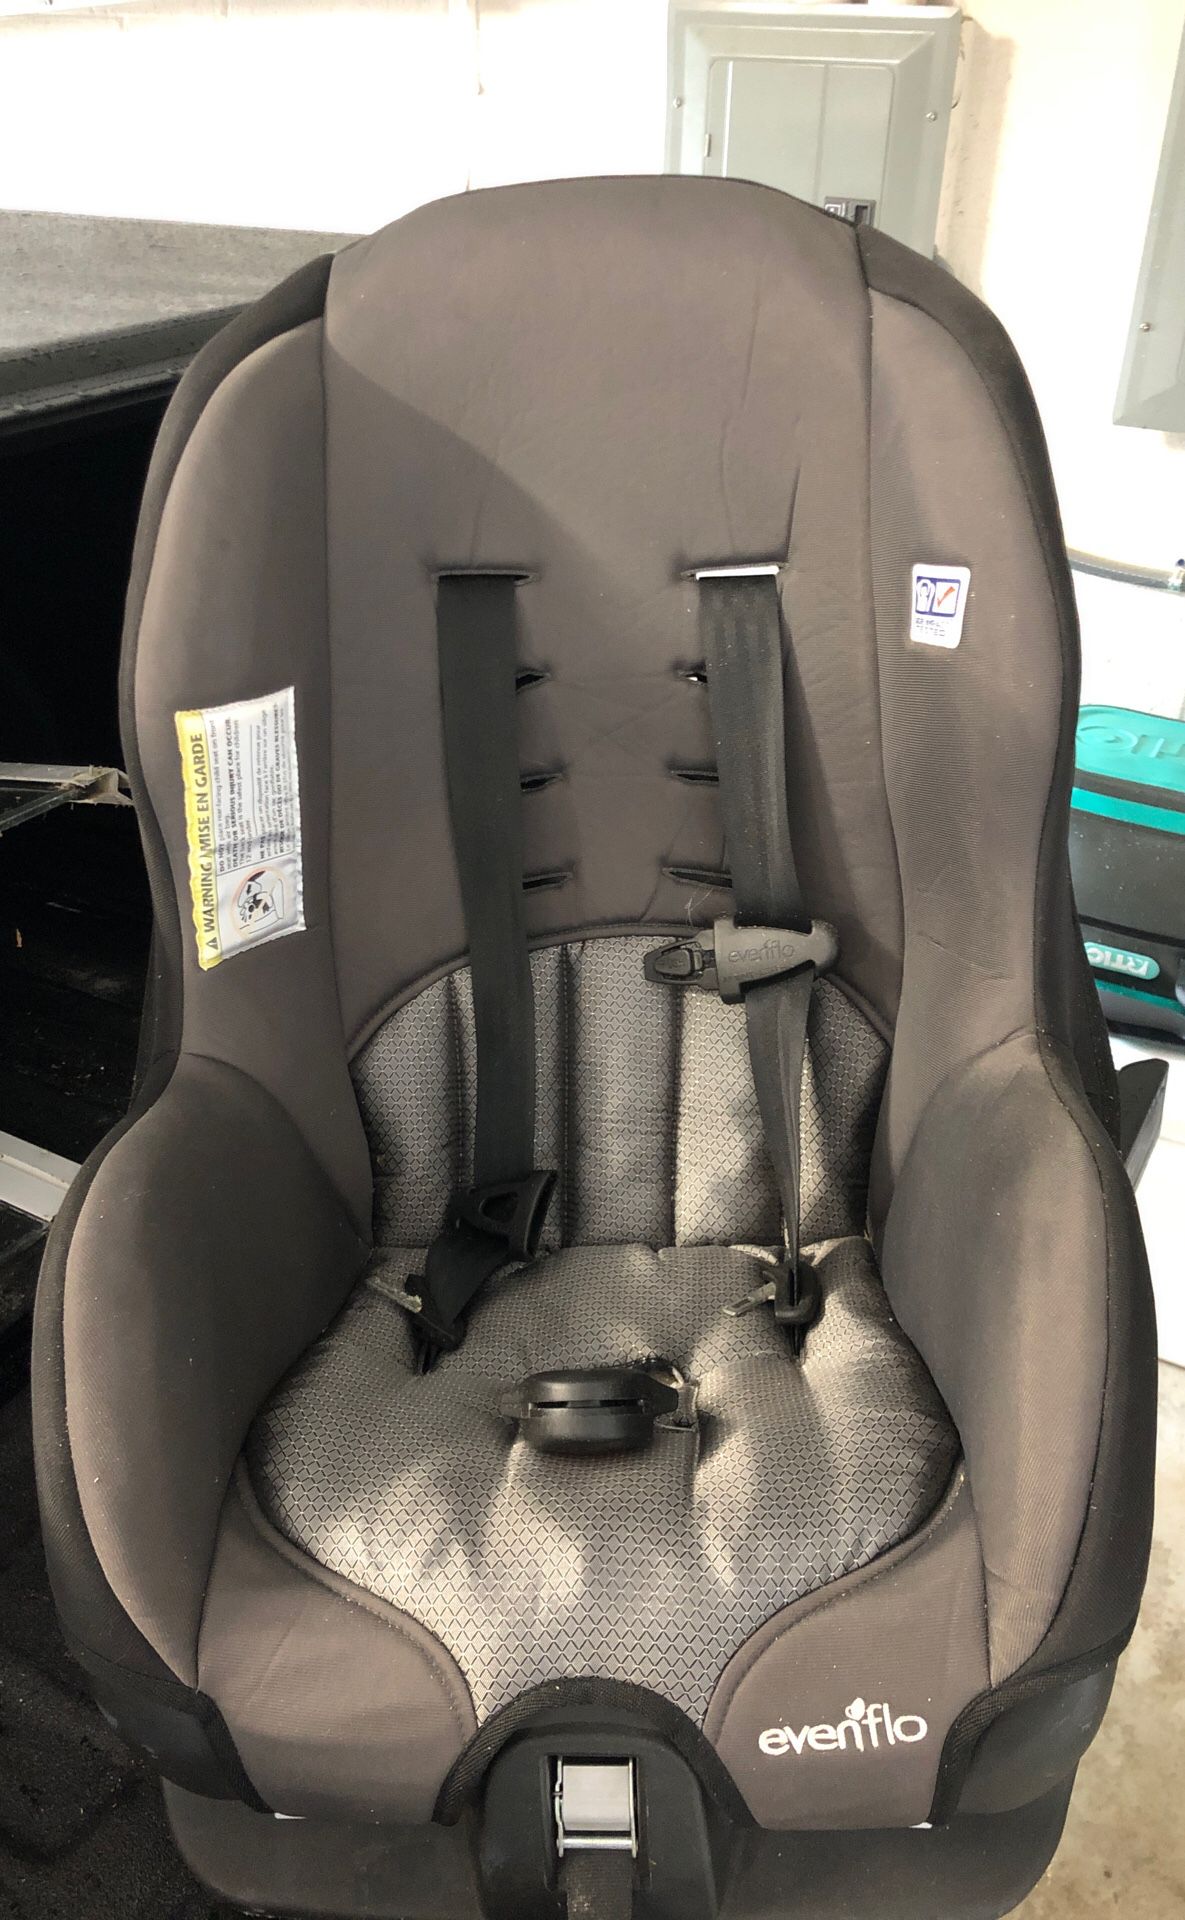 EvenFlo Tribute Car seat - lightly used